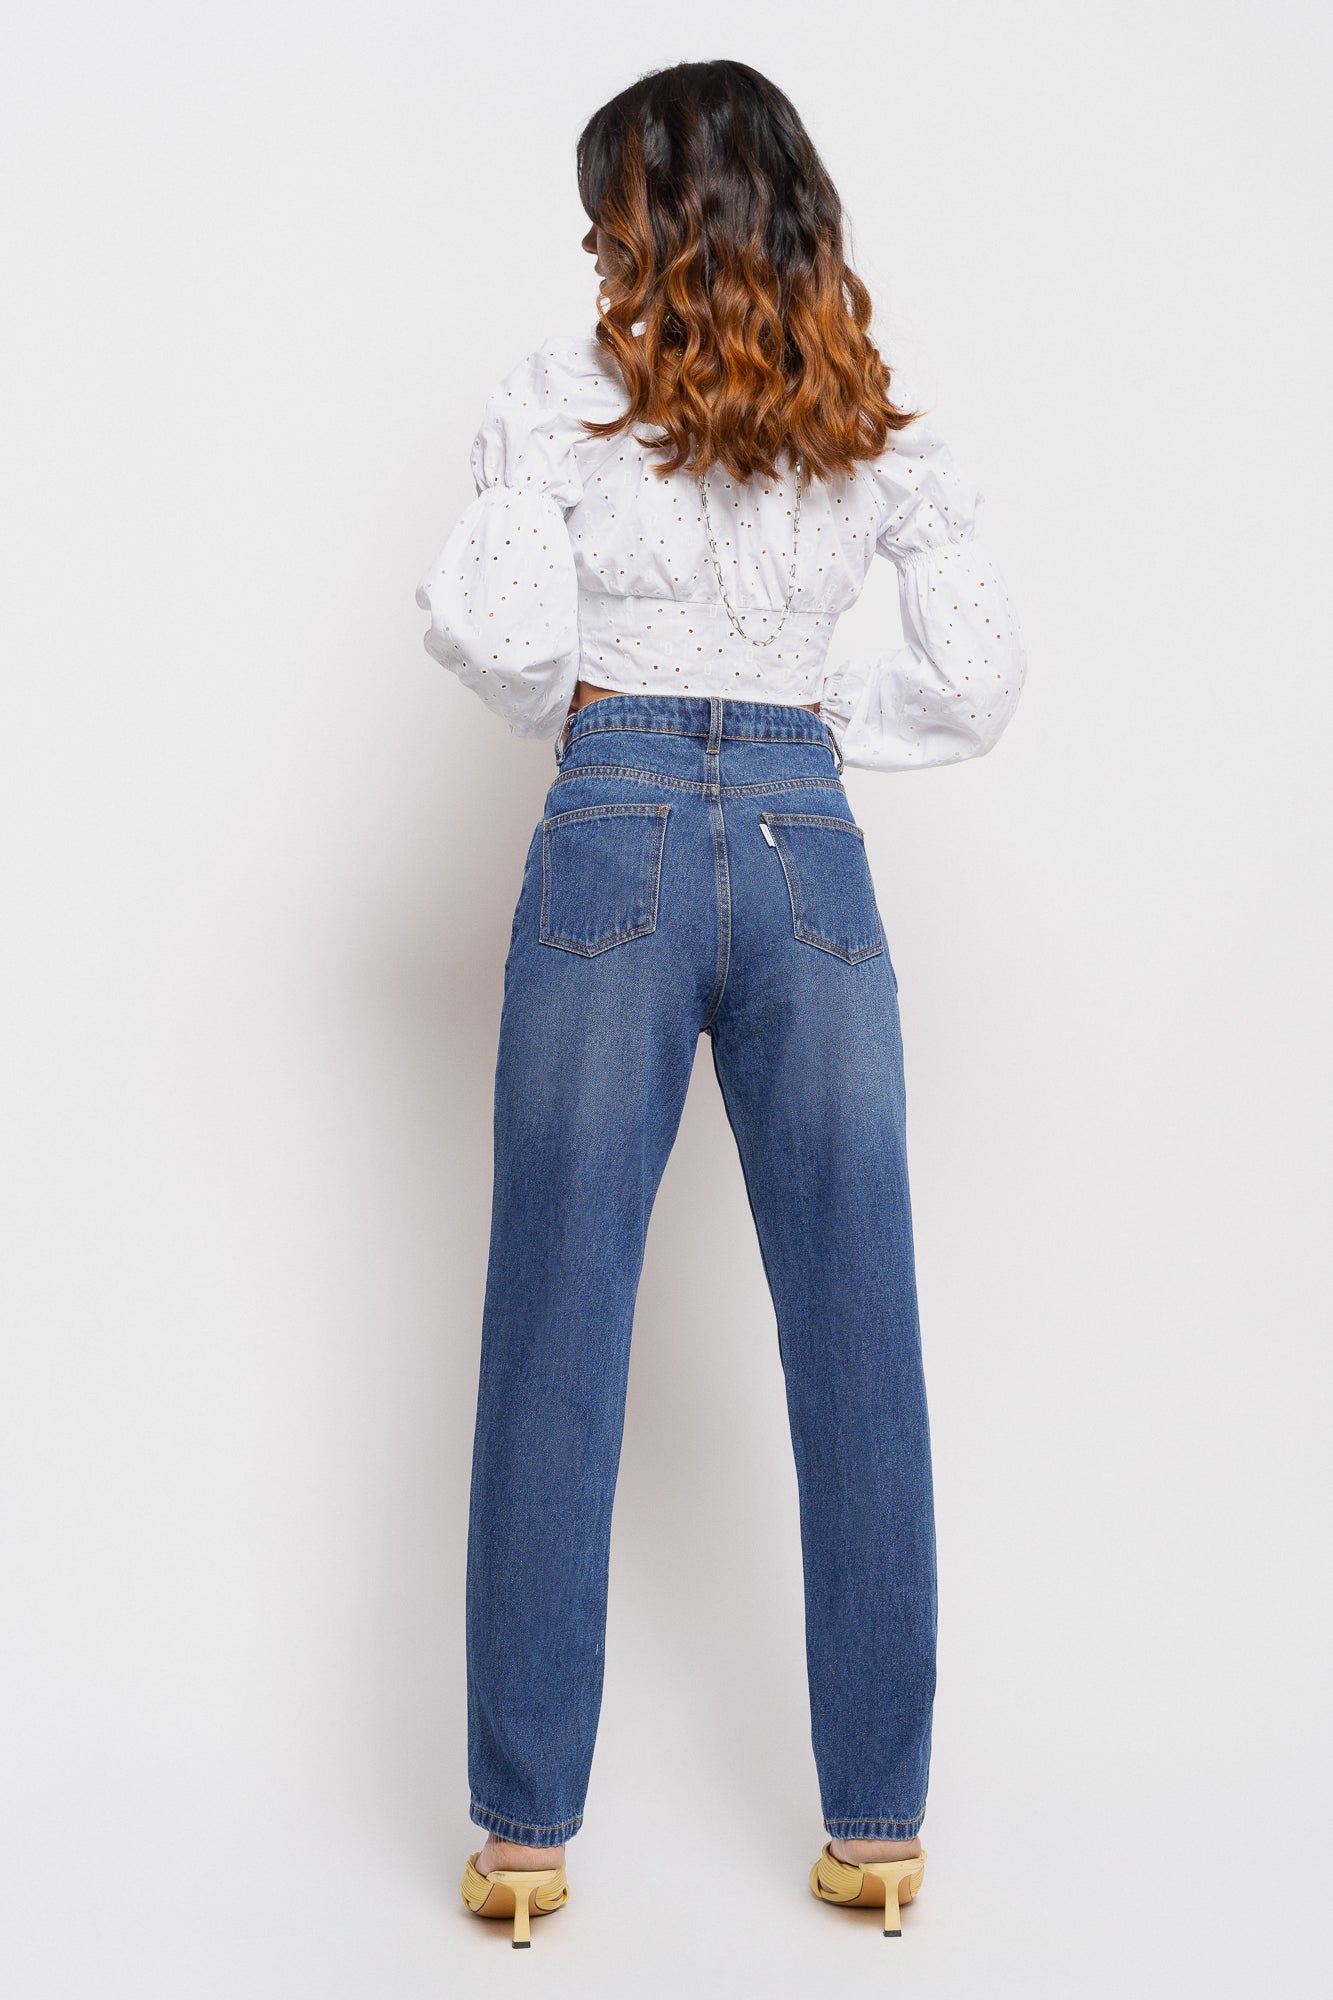 Shop Mom Fit Jeans for Women Online at Best Price - Kraus Jeans